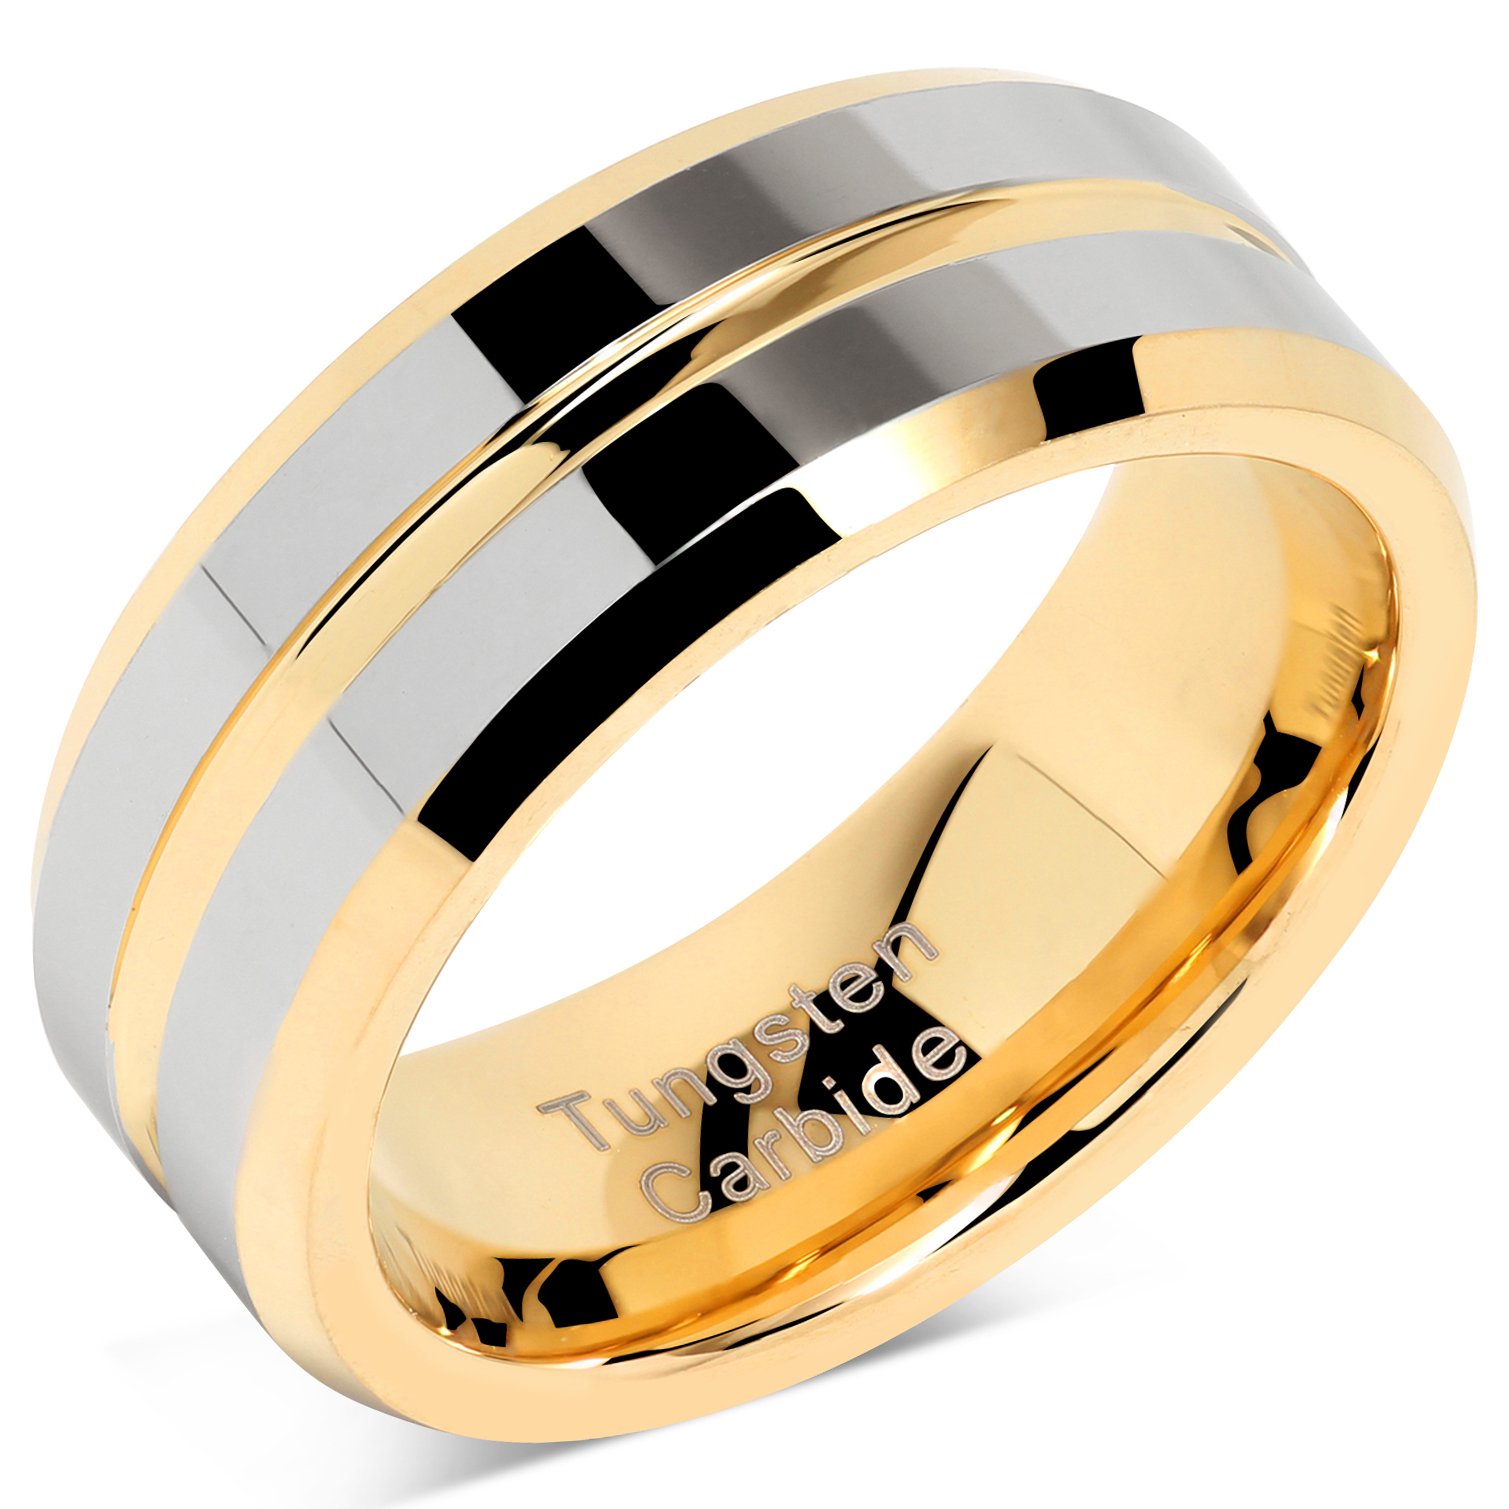 100S JEWELRY Tungsten Men Wedding Bands Gold Silver Two Tone Grooved